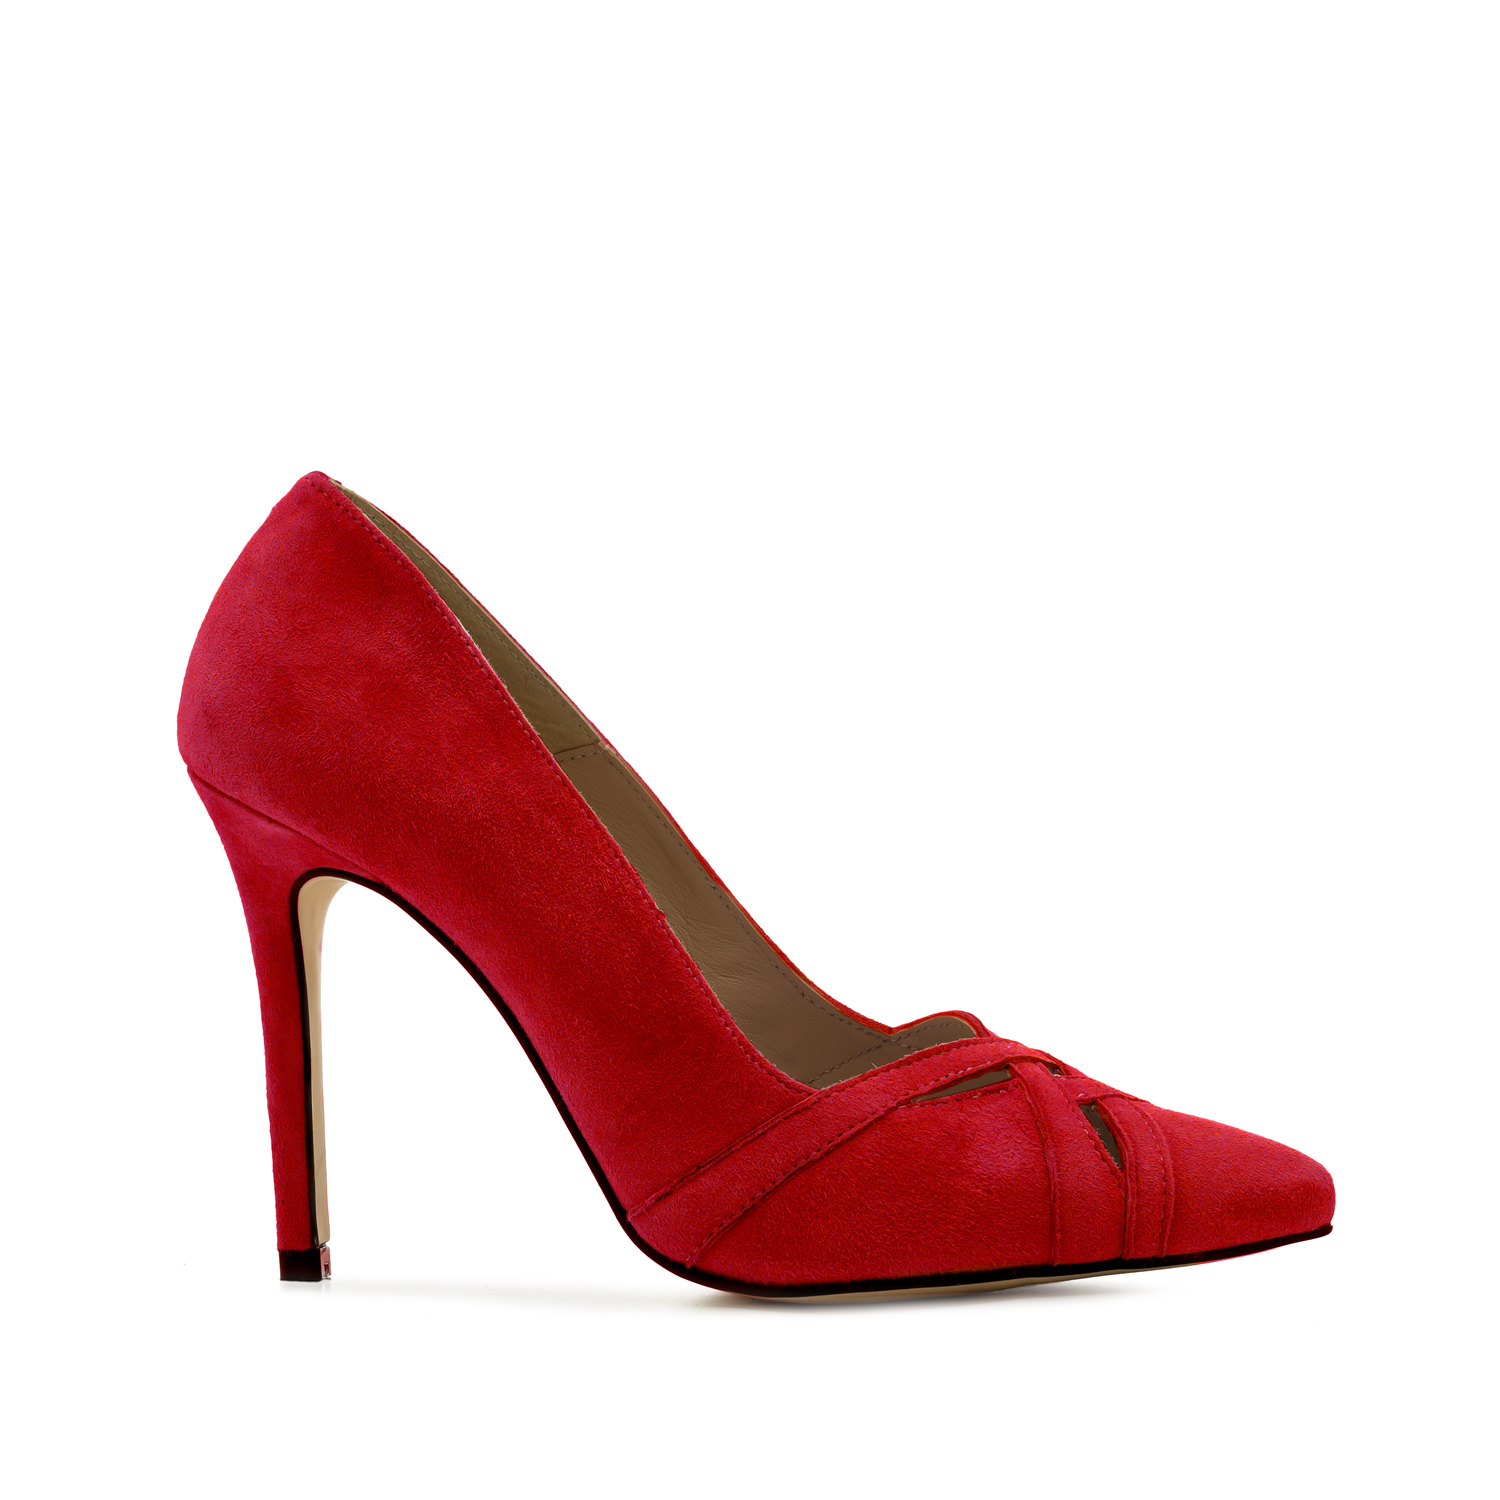 Crossover Stilettos in Red Suede Leather 